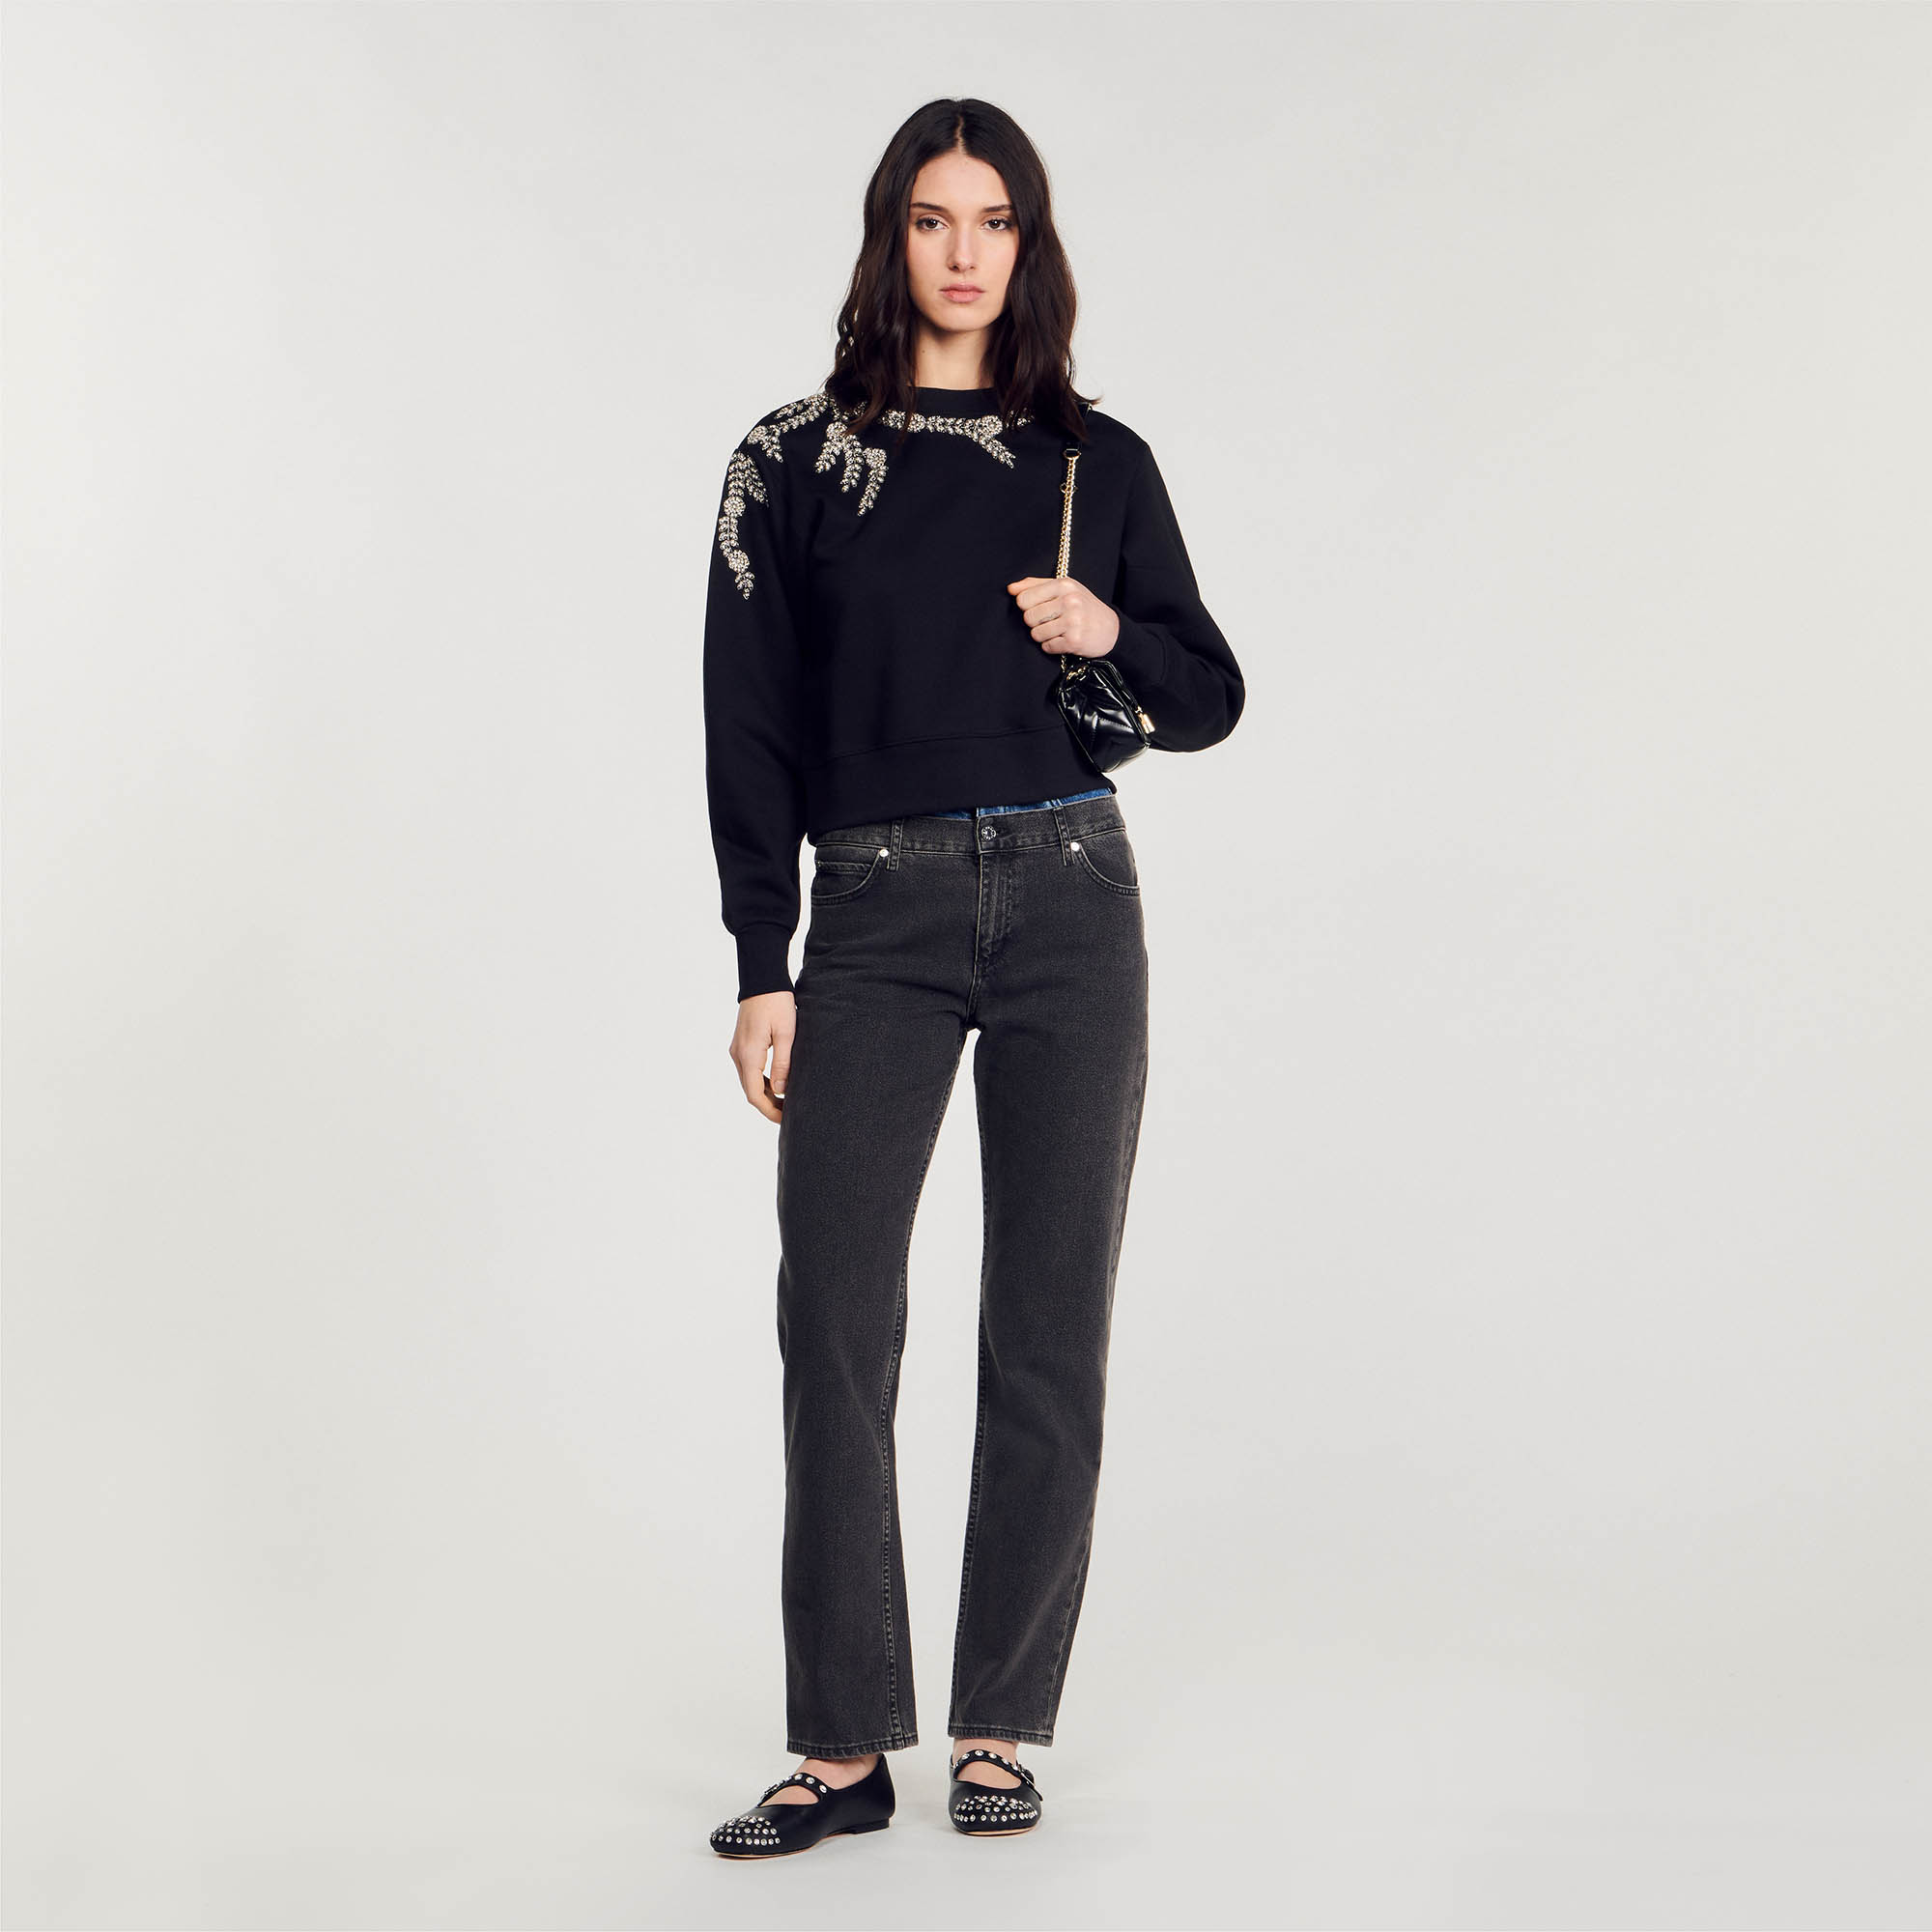 Sandro cotton Sweatshirt with a round neckline and long sleeves, embellished with rhinestone embroidery on the shoulder